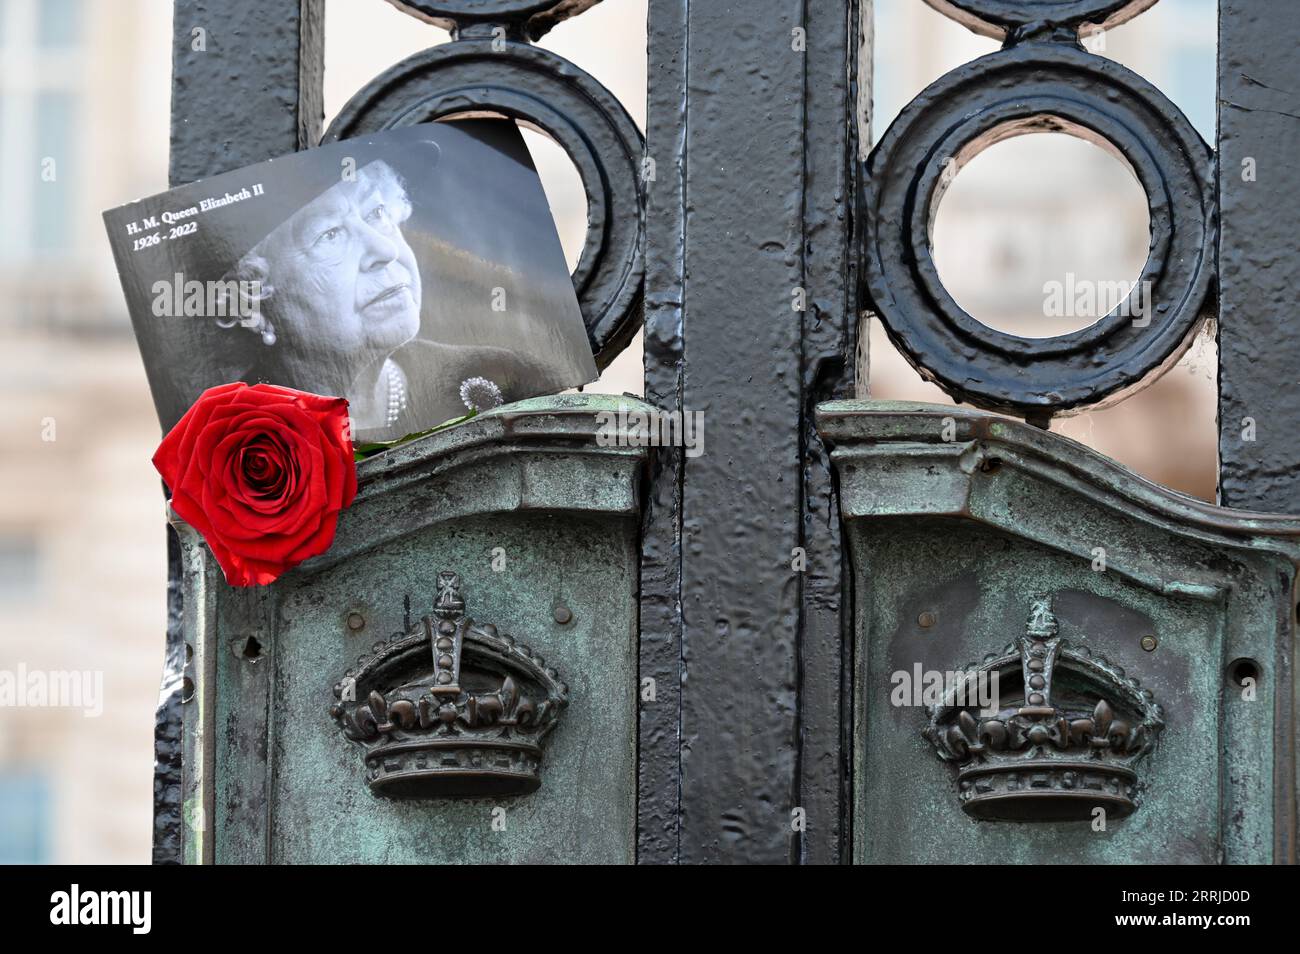 London, UK. A single red rose was placed in the Palace gates in memorial to her majesty.The First Anniversary of Queen Elizabeth II's Death, Buckingham Palace, London. Commemorations were low-key with King Charles, who is at Balmoral, not taking part in any official engagements today. Credit: michael melia/Alamy Live News Stock Photo